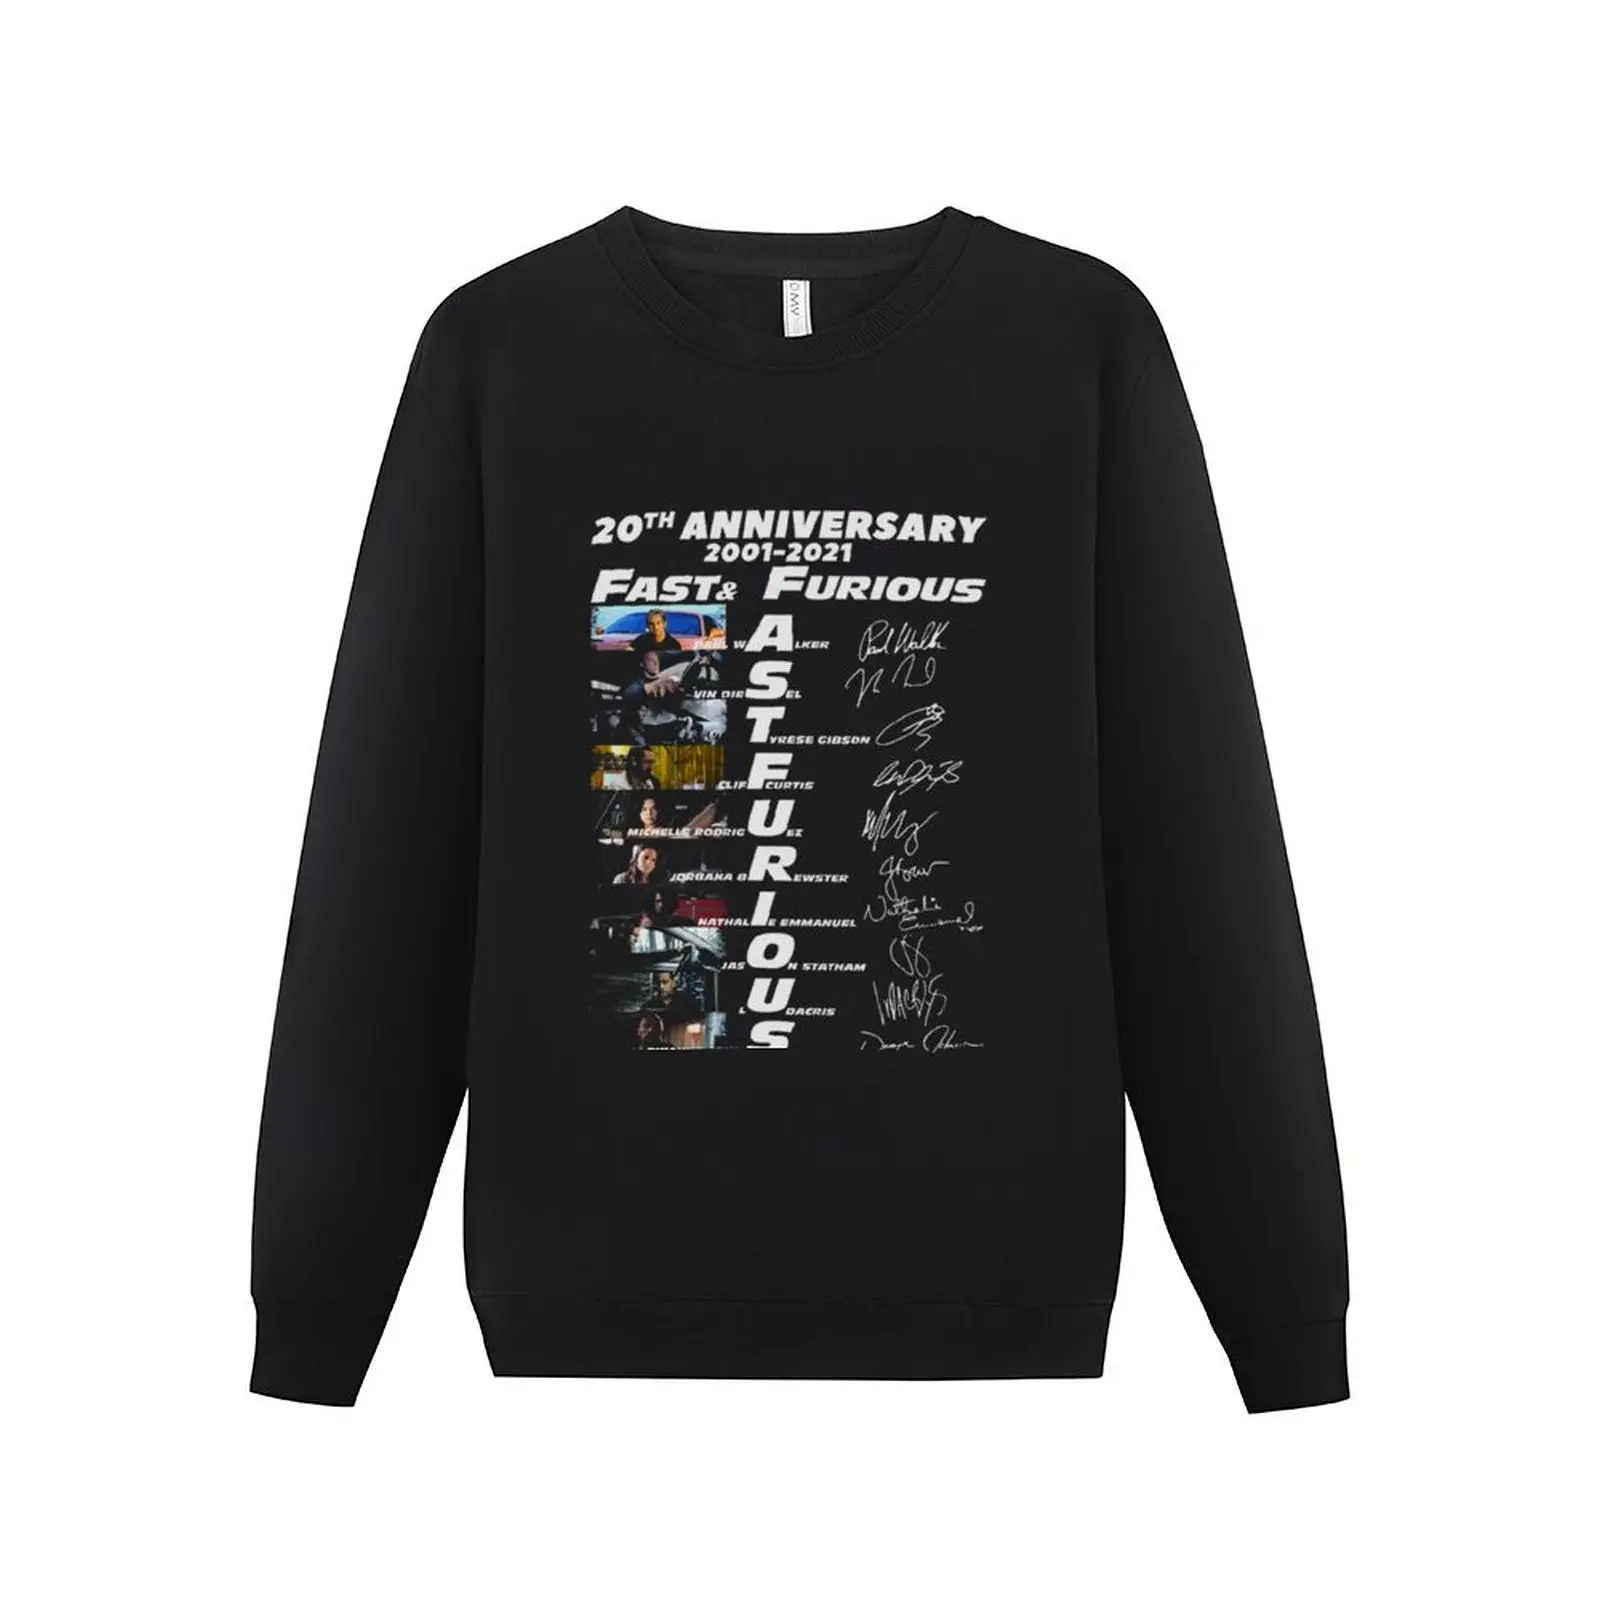 

New 20th Anniversary 2001 2021 Fast Furious Signatures Sweatshirt men clothing winter clothes men's clothing hooded sweatshirt